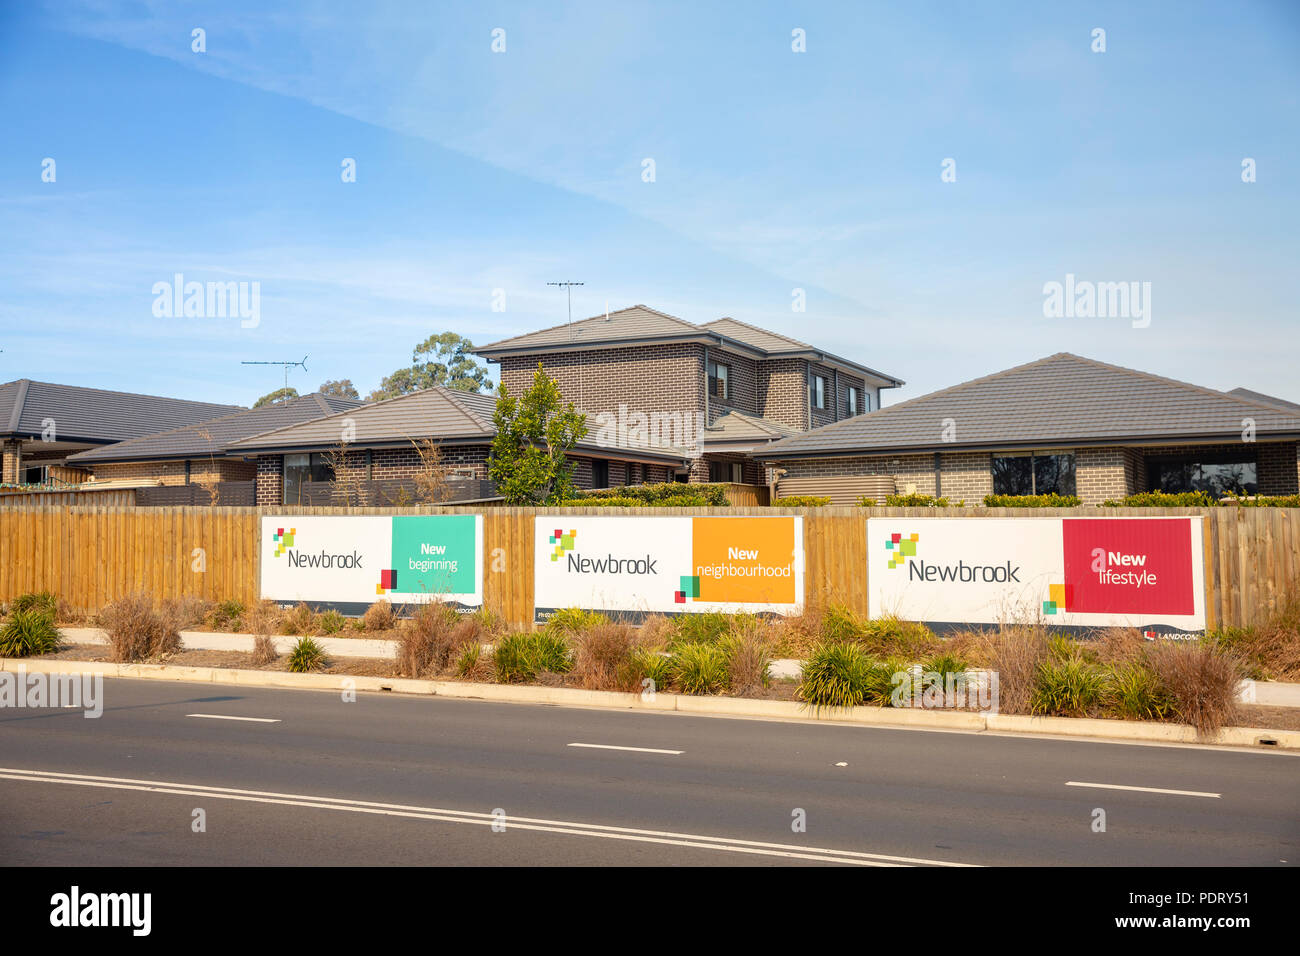 Newbrook, a new neighbourhood being developed for residential living in Campbelltown,South West Sydney,Australia Stock Photo